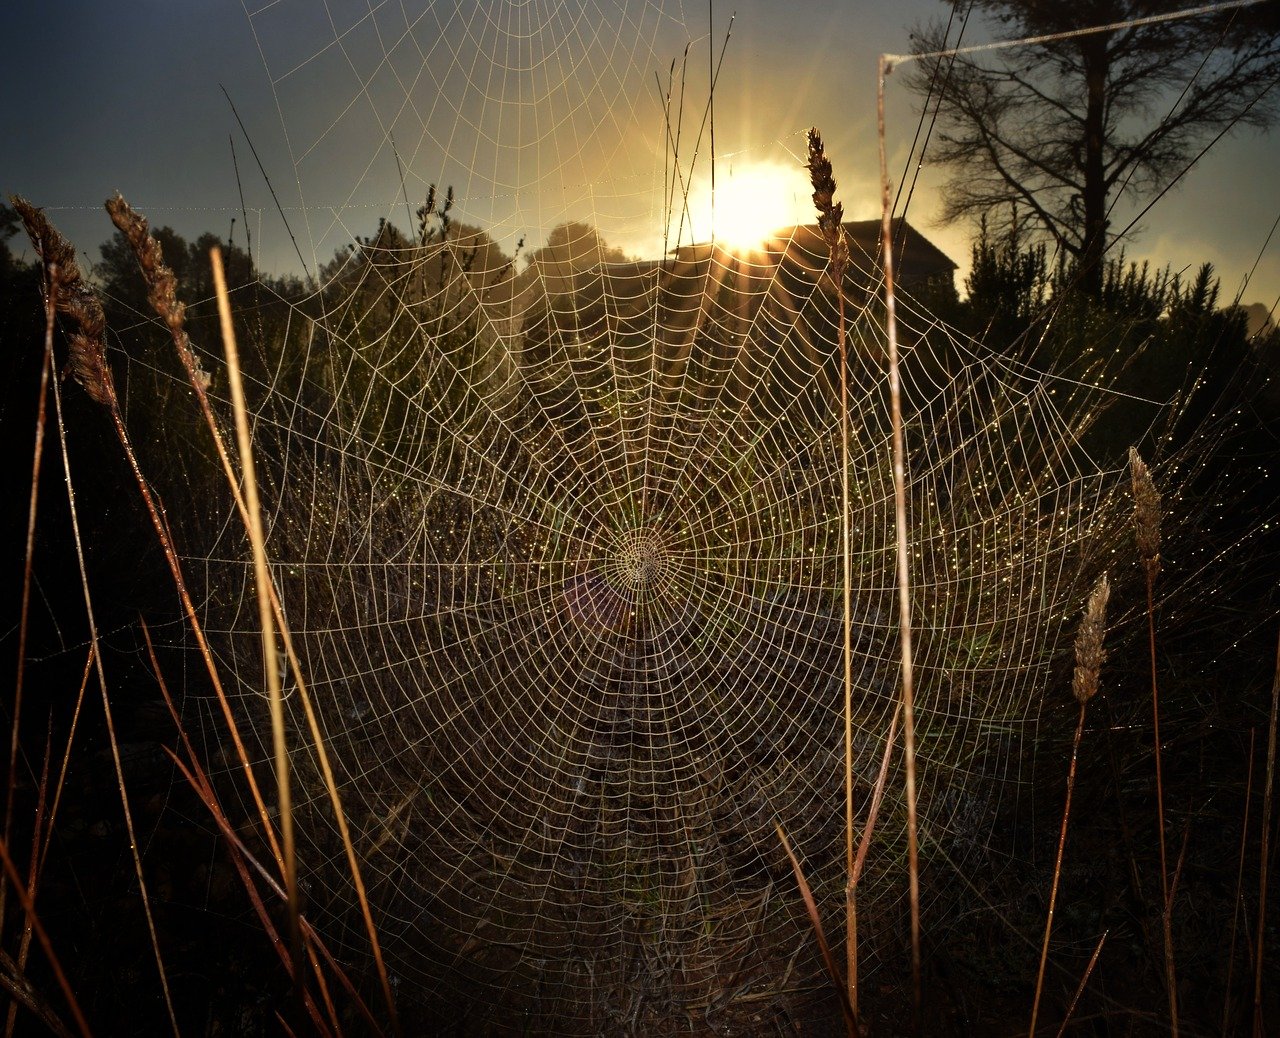 Photo of a spider web with the sun setting in the distance.